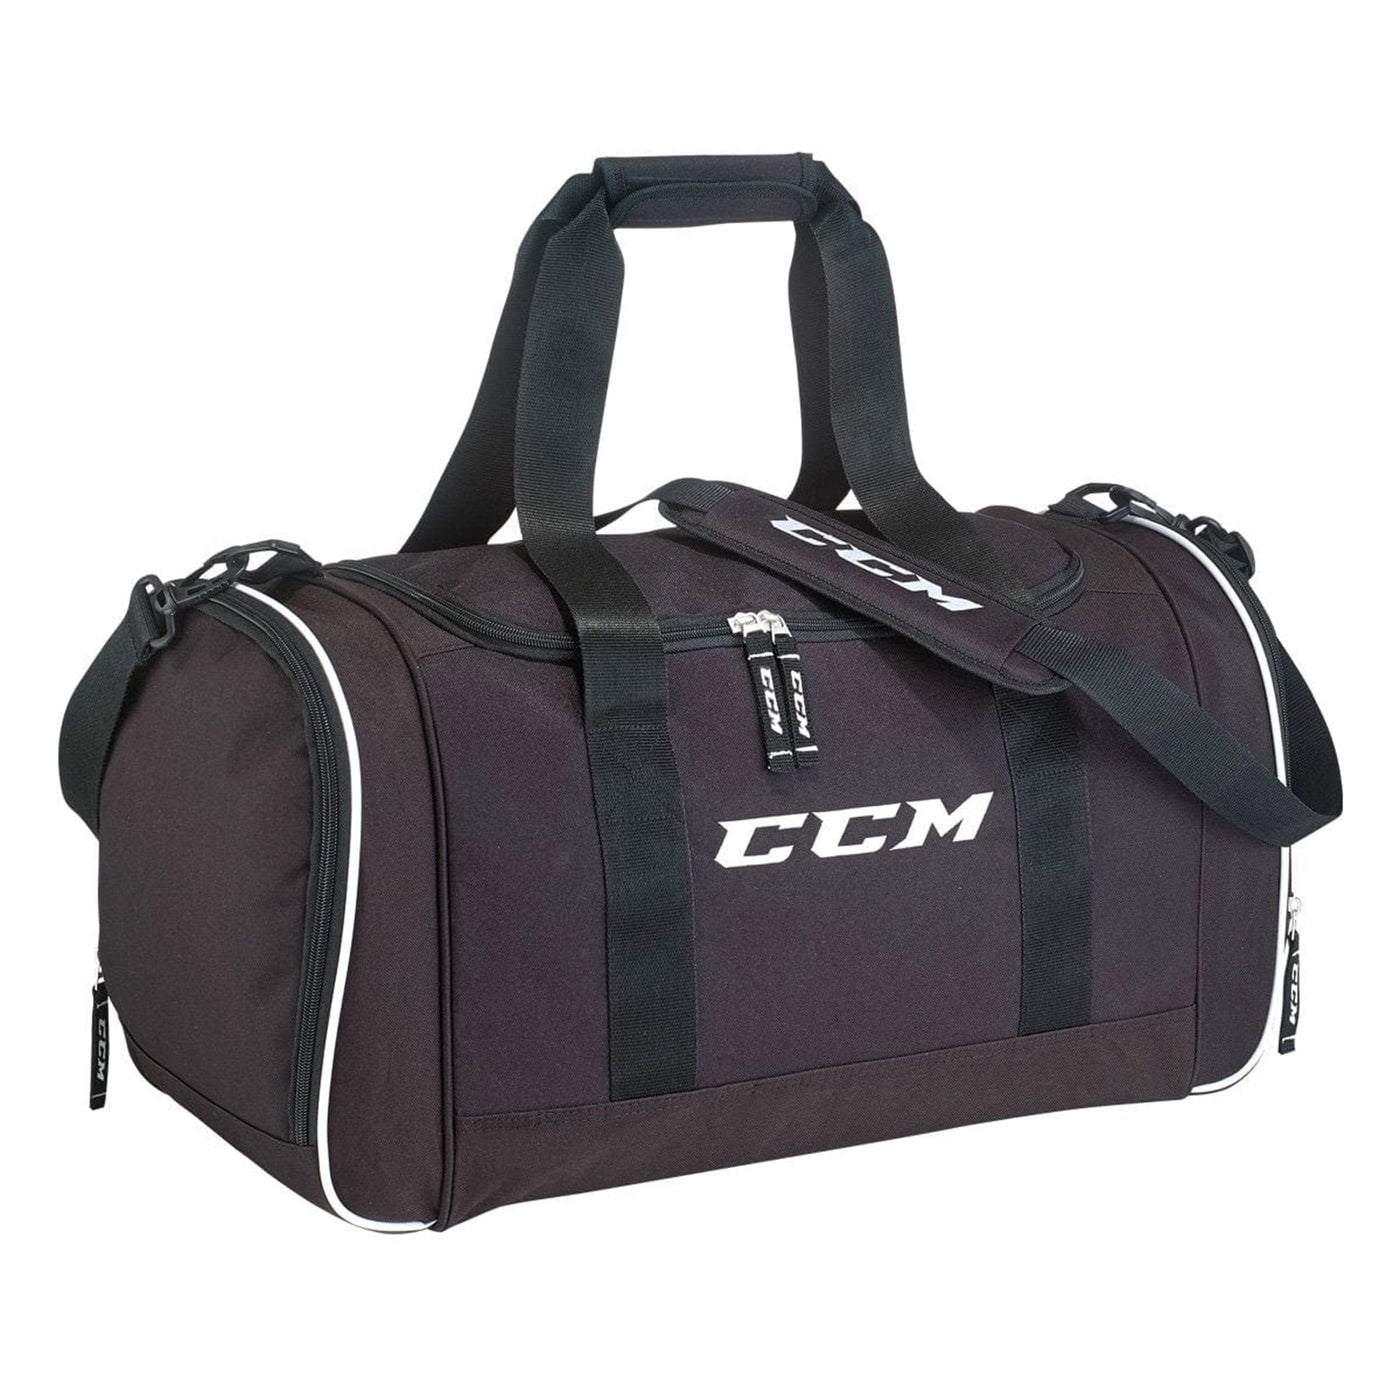 CCM Sport Duffle Bag - The Hockey Shop Source For Sports